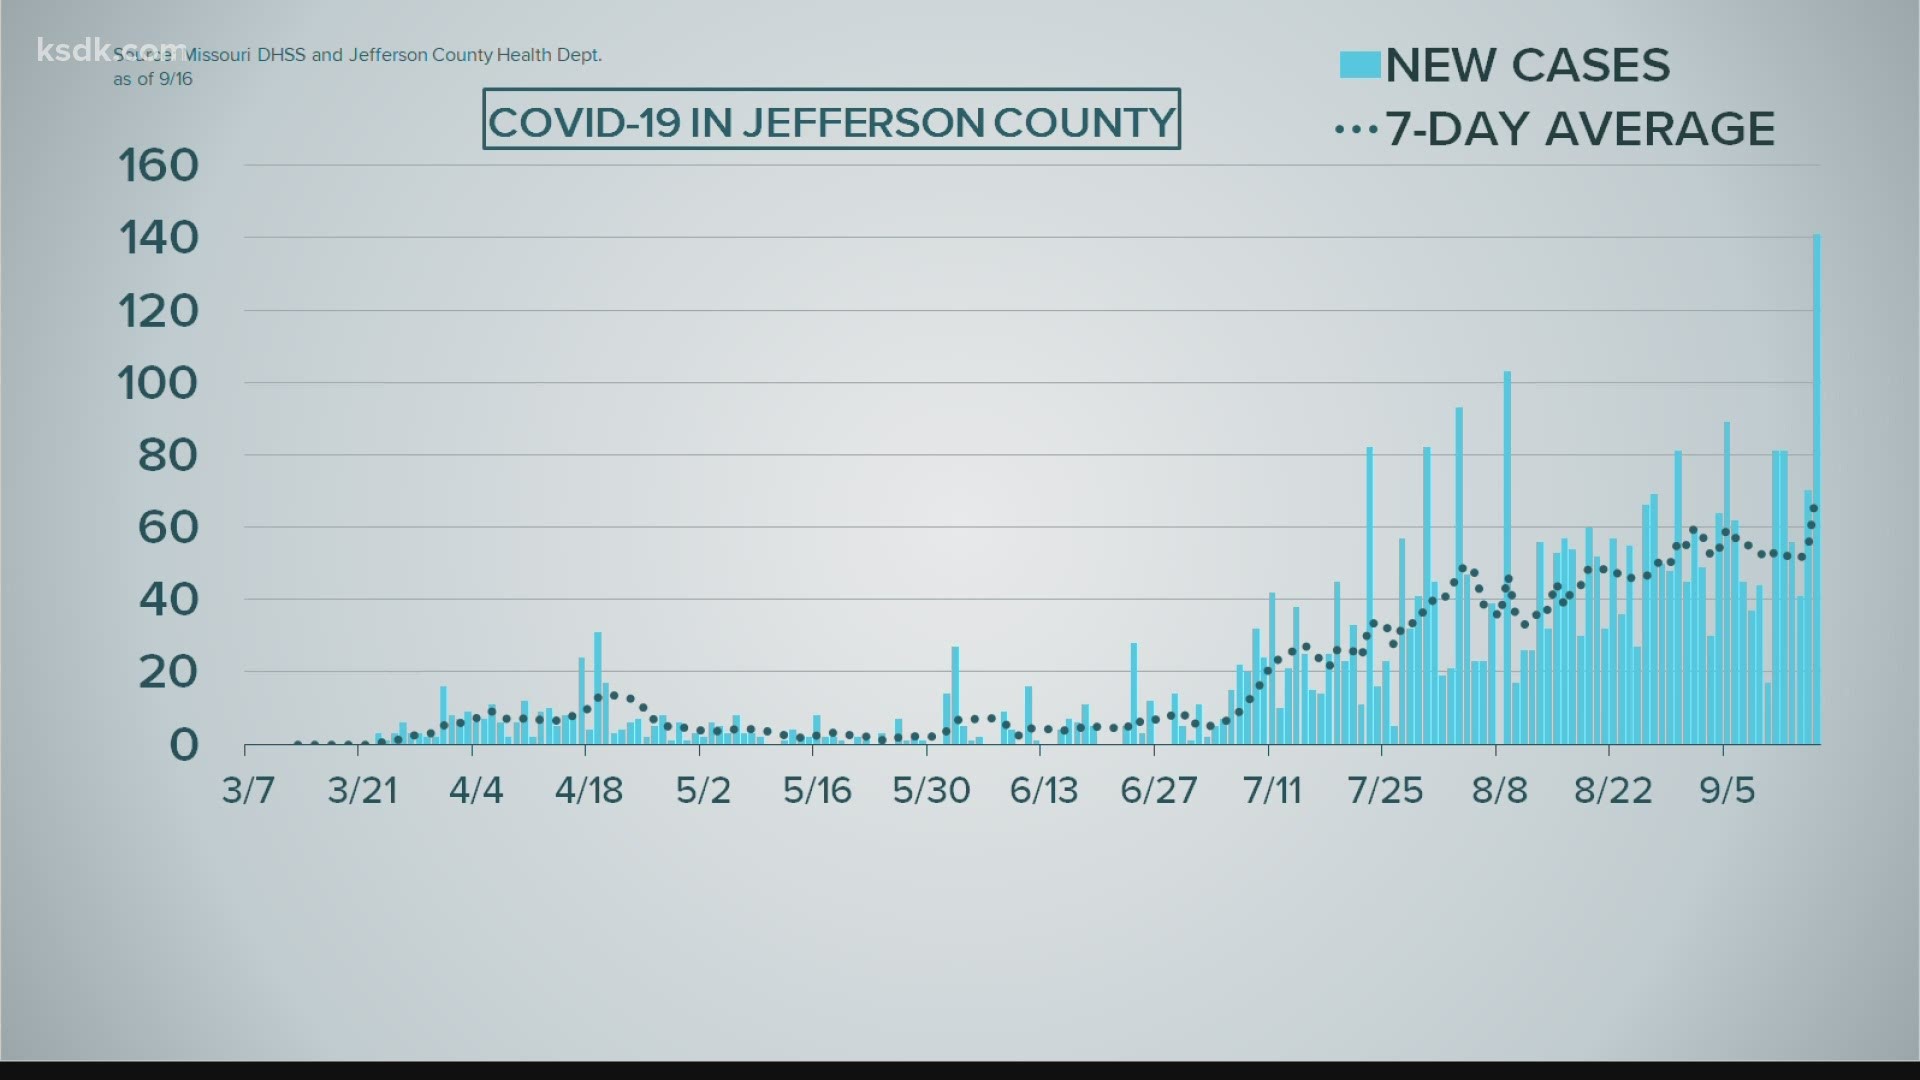 COVID-19 cases in Jefferson County are on the rise